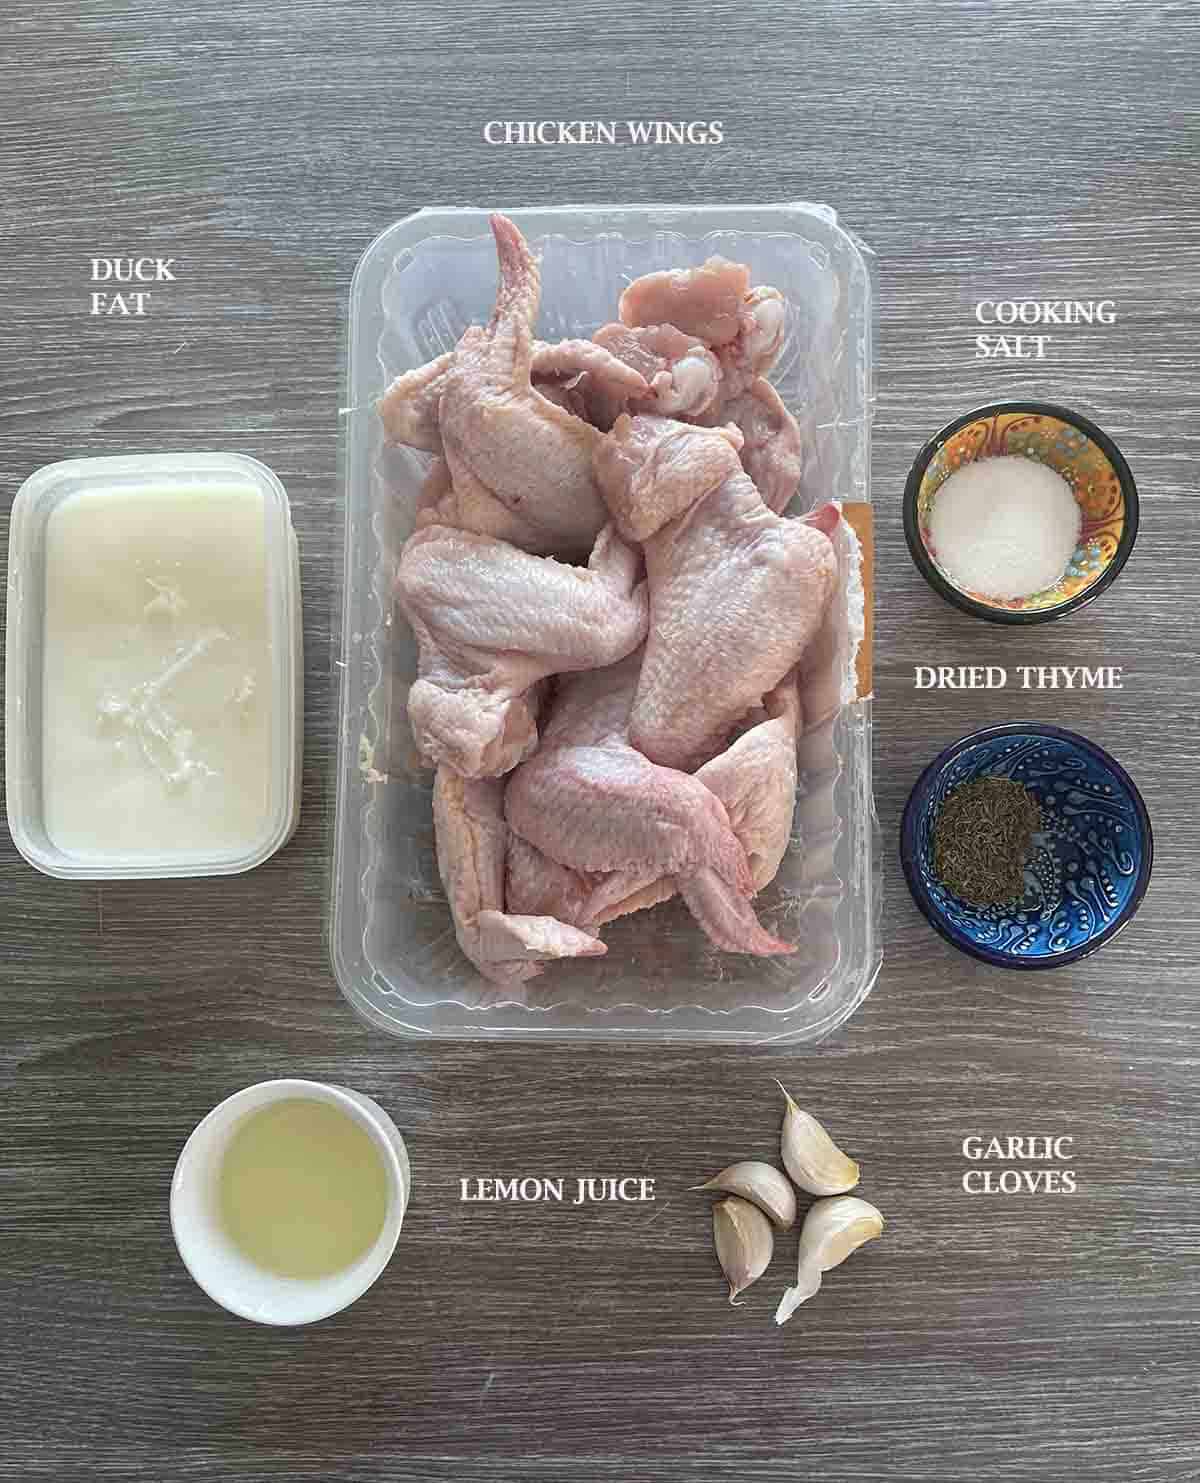 ingredients including wings, duck fat, thyme and seasoning.